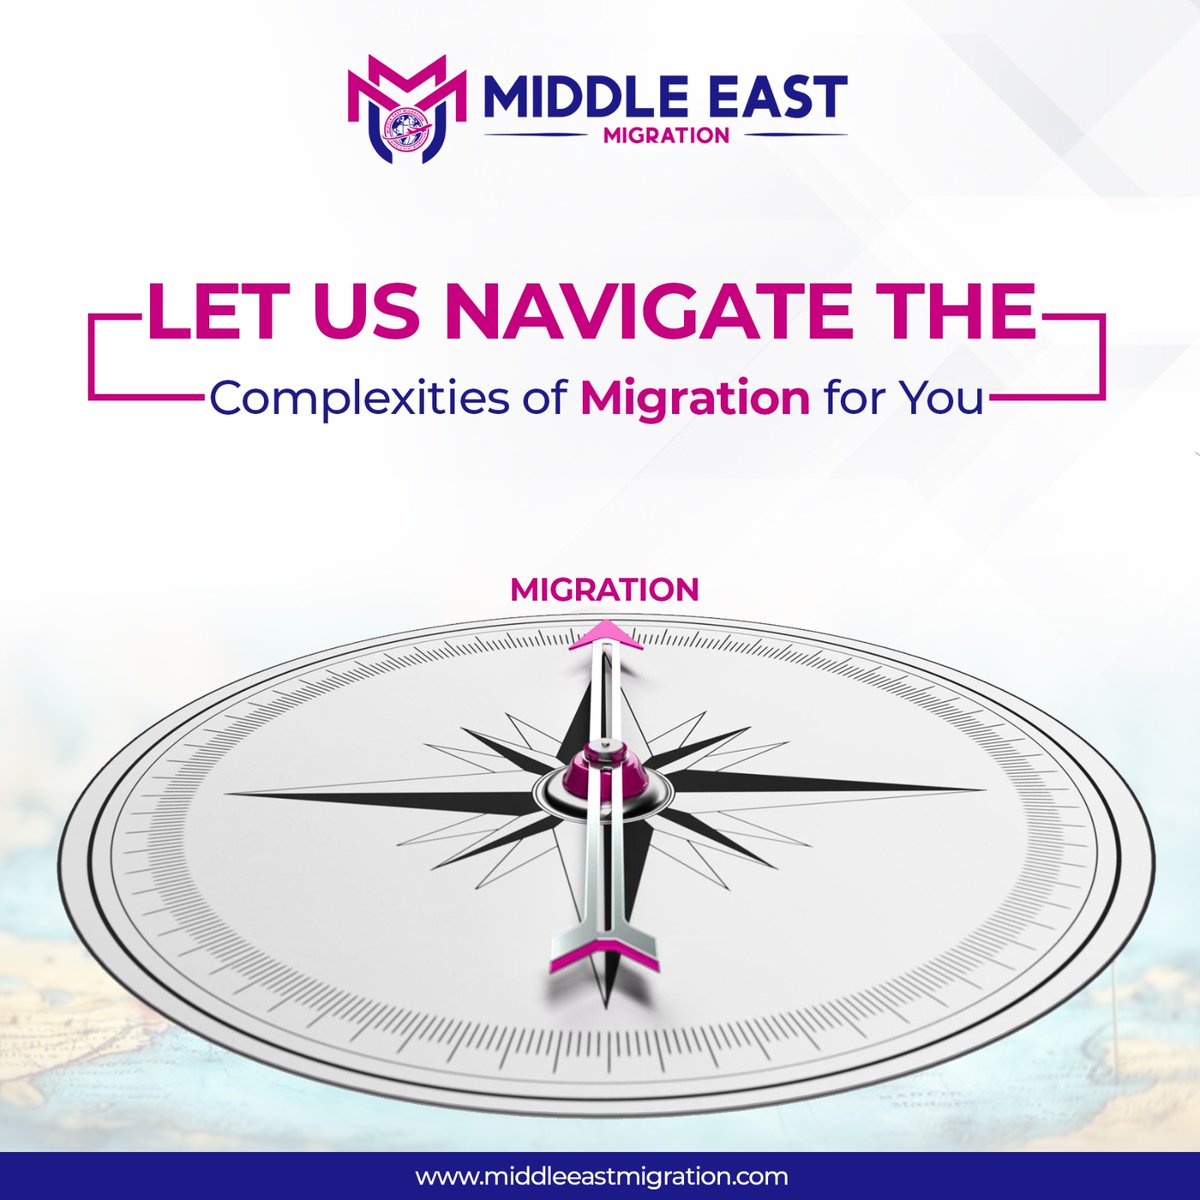 📍 Start on a smooth migration journey with us! 🌎✈️ 
.
.
.
#middleeast #middleeastimmigration #immigration #abroadmigration #dubai #immigrationconsultants #immigrationservices #visaconsultants #jobs #workinabroad #abroadworkpermit #abroad #uae #instagood #instadaily